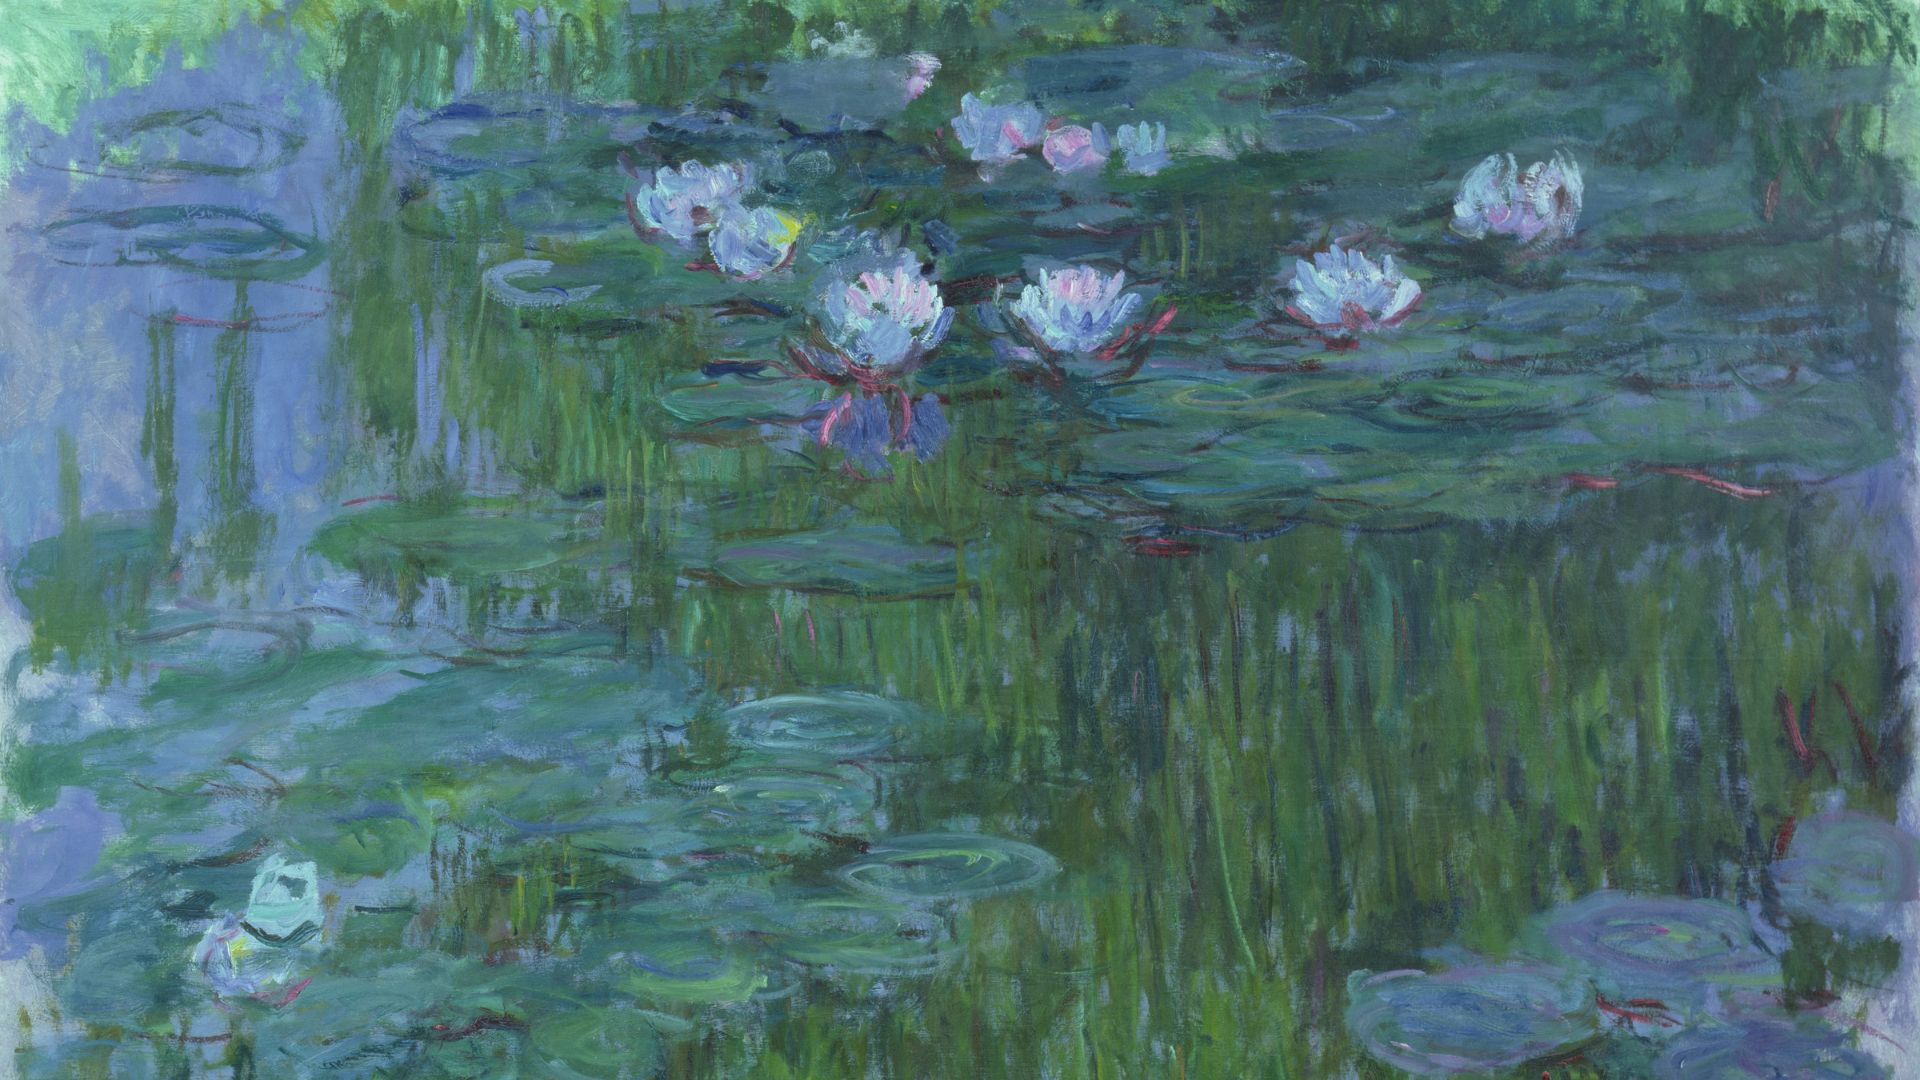 Water Lilies by Claude Monet is on view at the Saint Louis Art Museum.